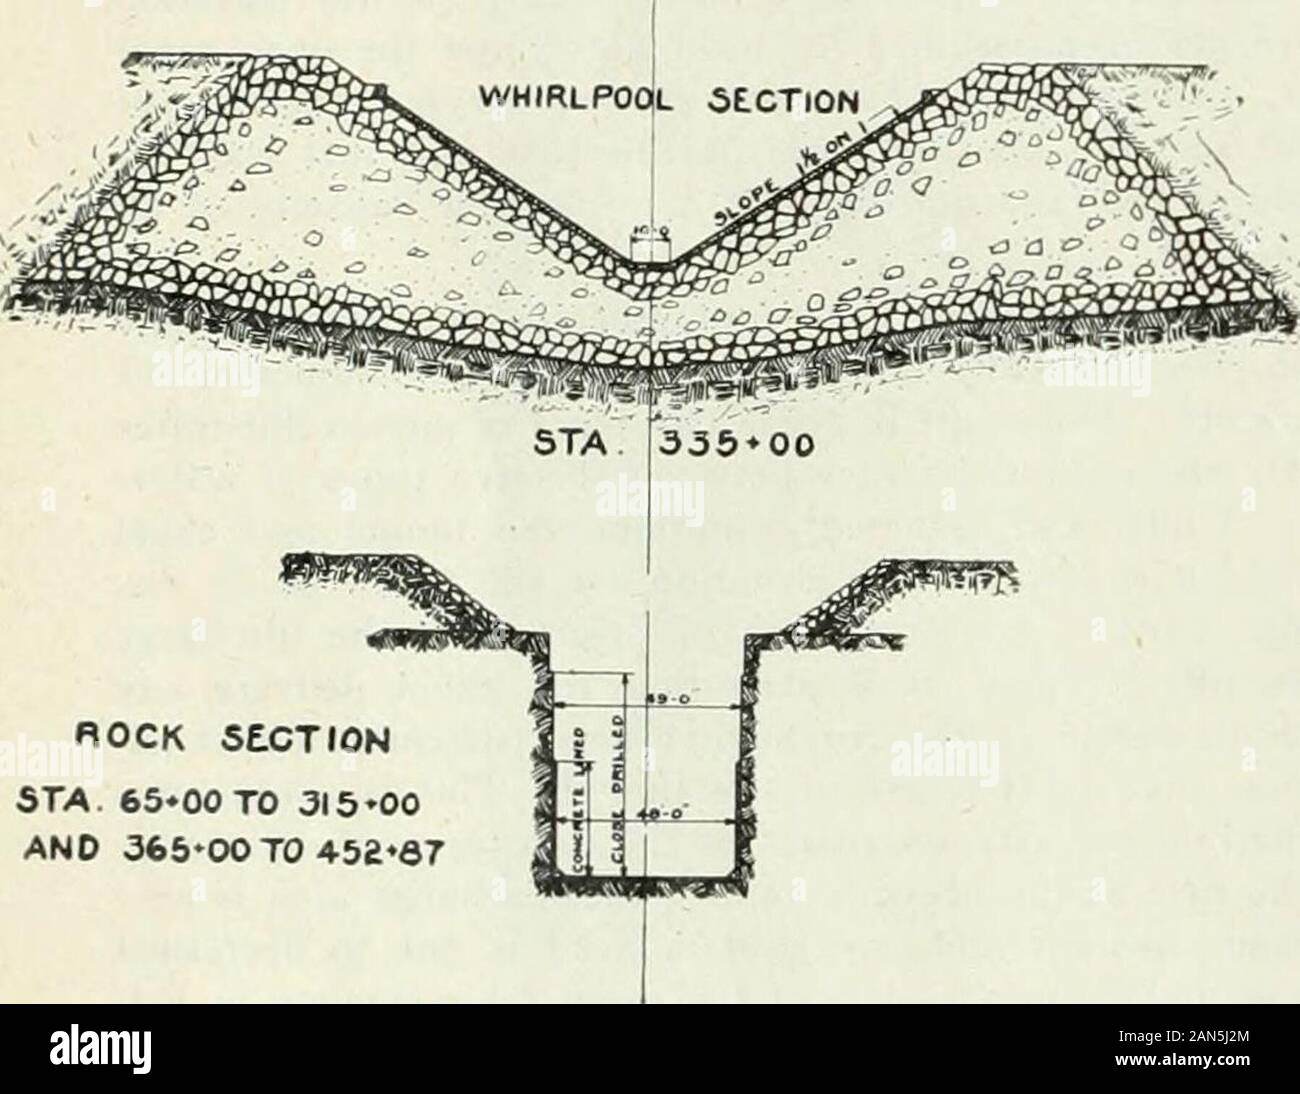 Electrical news and engineering . 5TA J440 TO 244-40RIVtH CHAINAGE.. nocK sEcrroN STA. 65-OOTO 315-00AND 366-00 TO 45£«S7 Three typical canal sections water level above the assumed absolute minimum; second,that starting from the common basis of a fixed minimumforebay level, the canal will deliver a constantly increasingquantity of power in proportion as the level of the head-wat-er rises above the assumed extreme minimum level, whichthe pressure tunnel cannot do to any appreciable extent byreason of its inherent hydraulic characteristics; and finally,that the open canal is the only agency, und Stock Photo